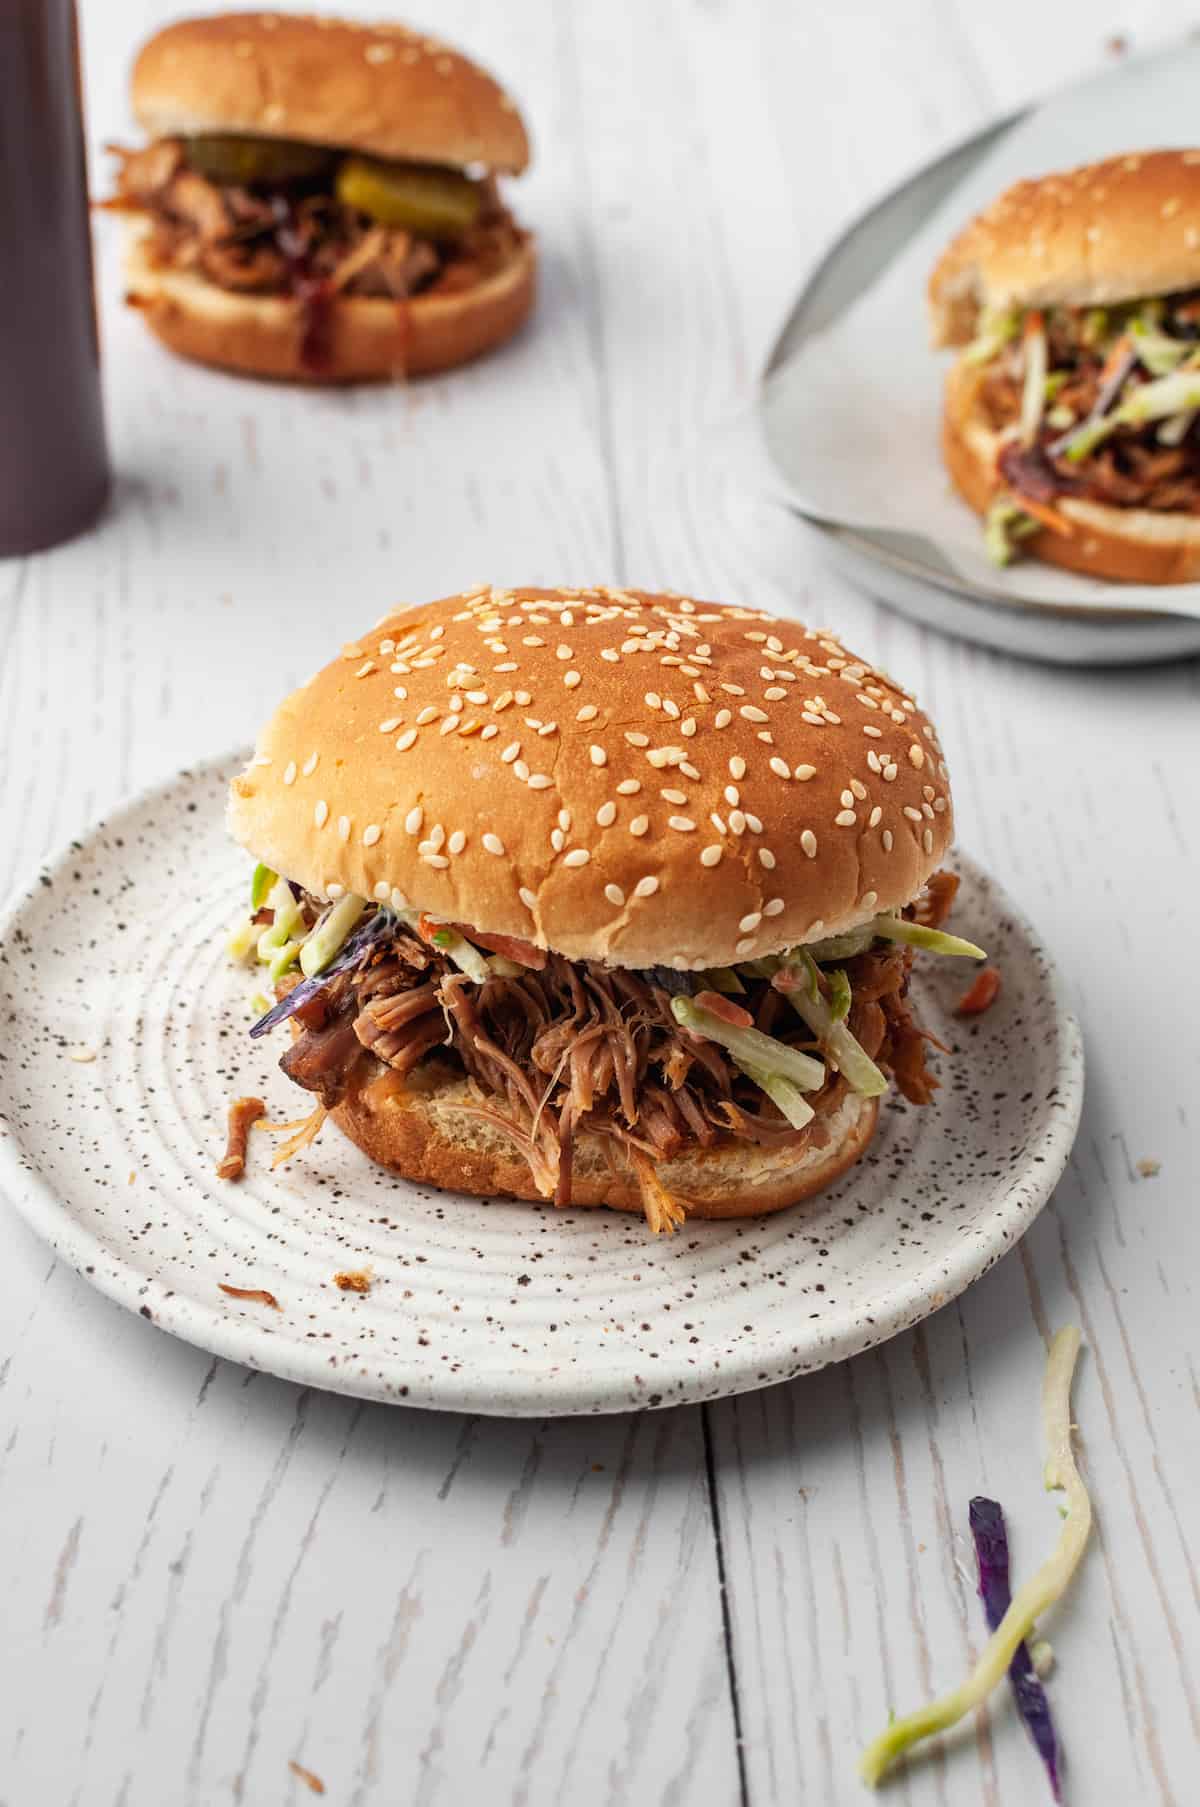 Pulled pork sandwich on plate with 2 sandwiches in background